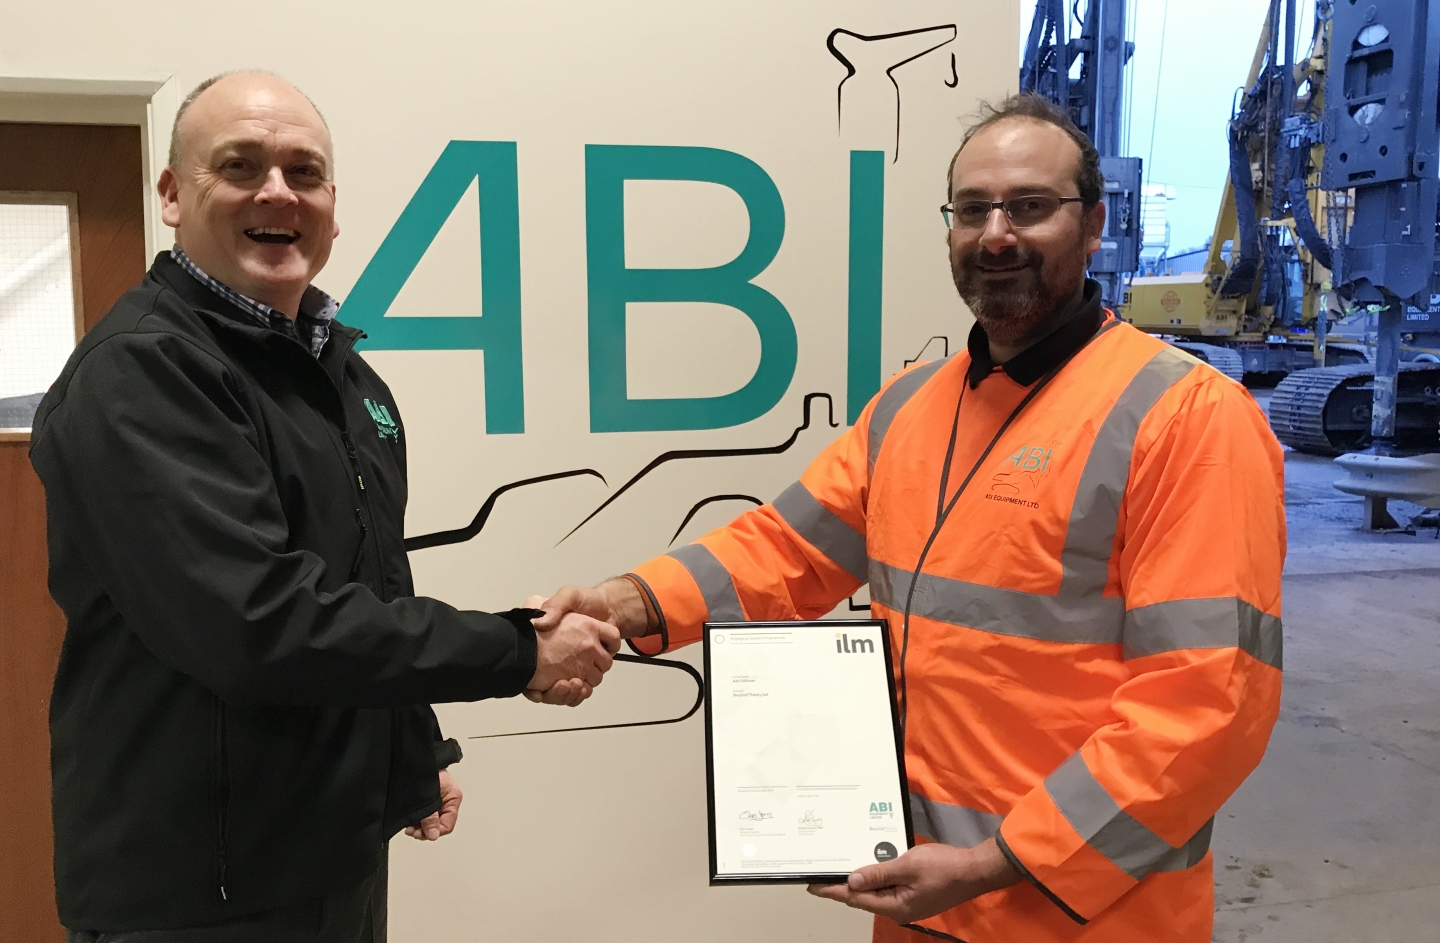 Congratulations to a valued member of the ABI team!